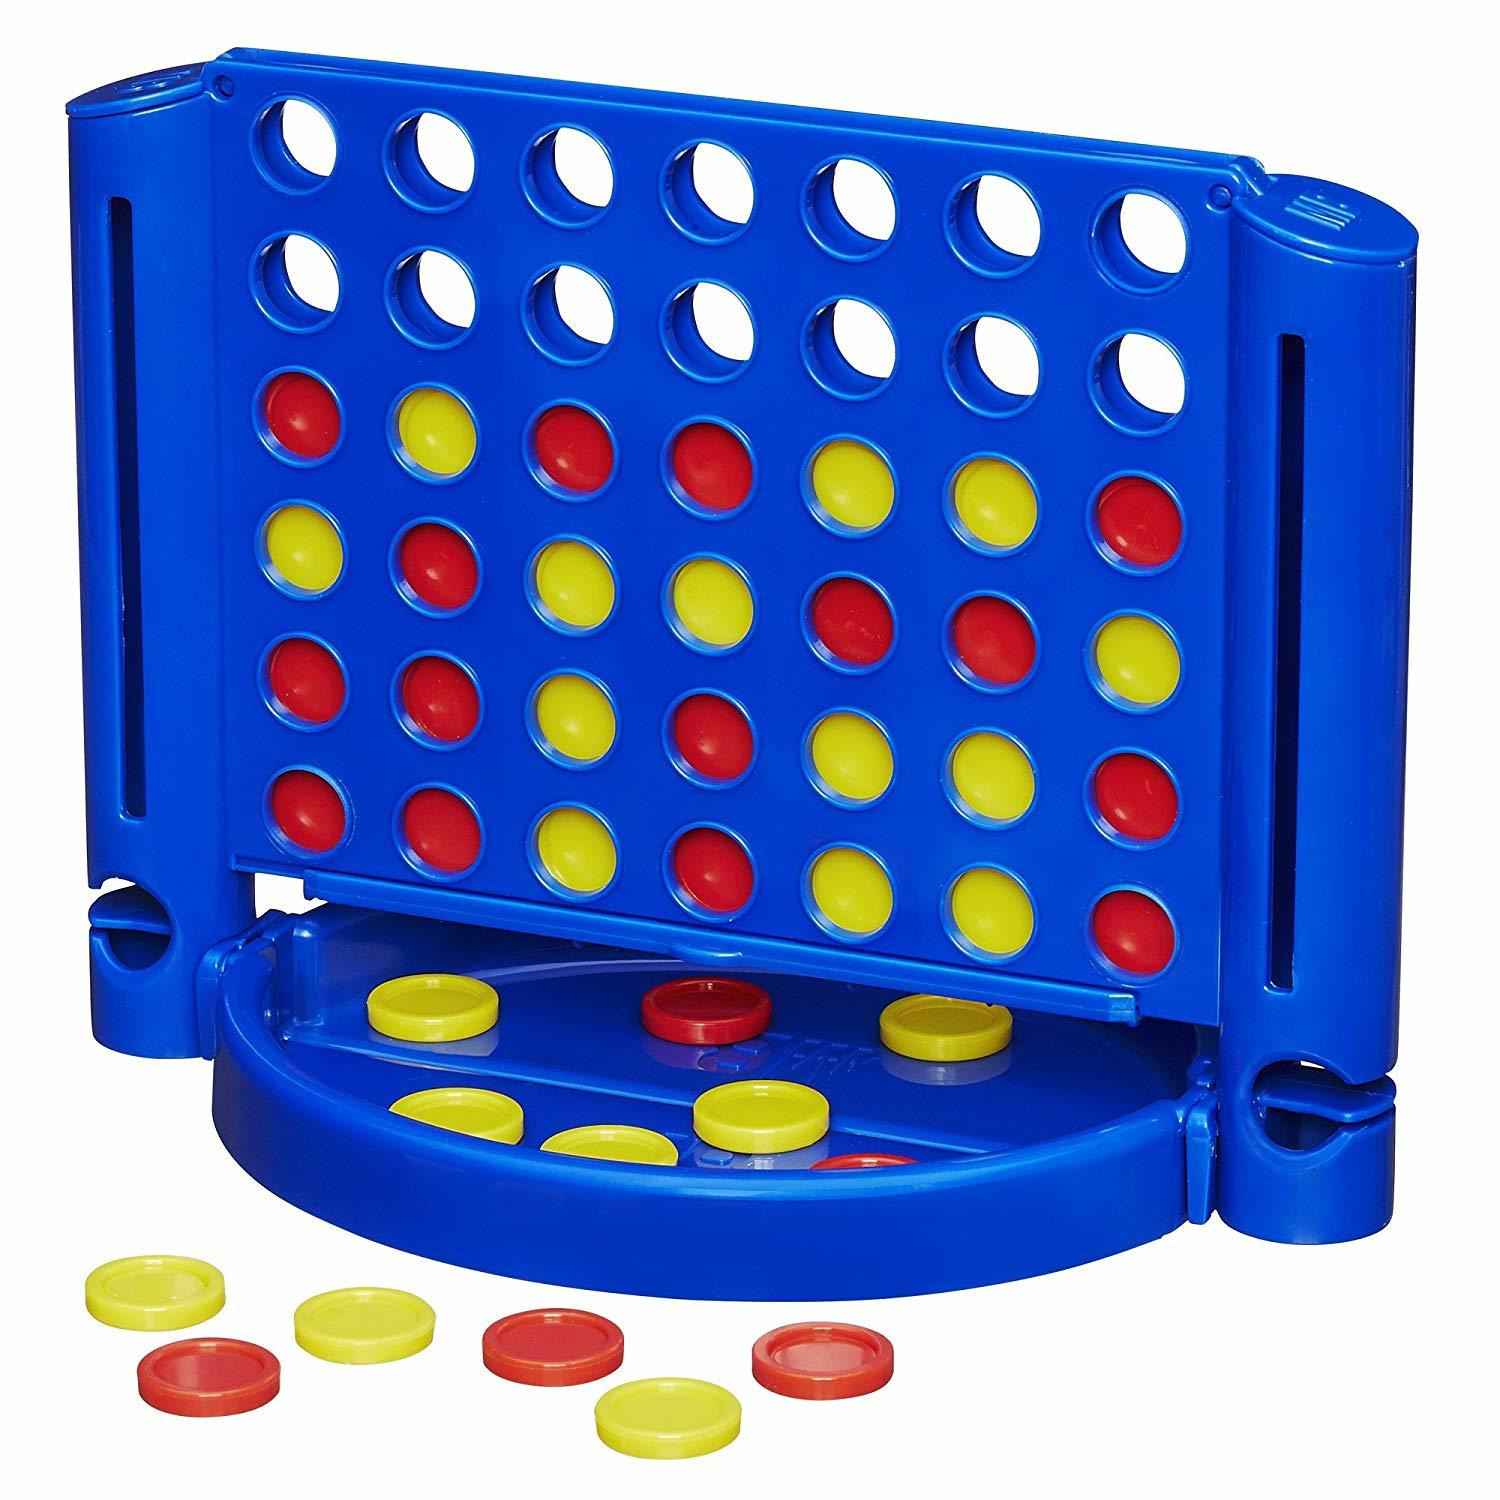 Connect 4 Grab & Go